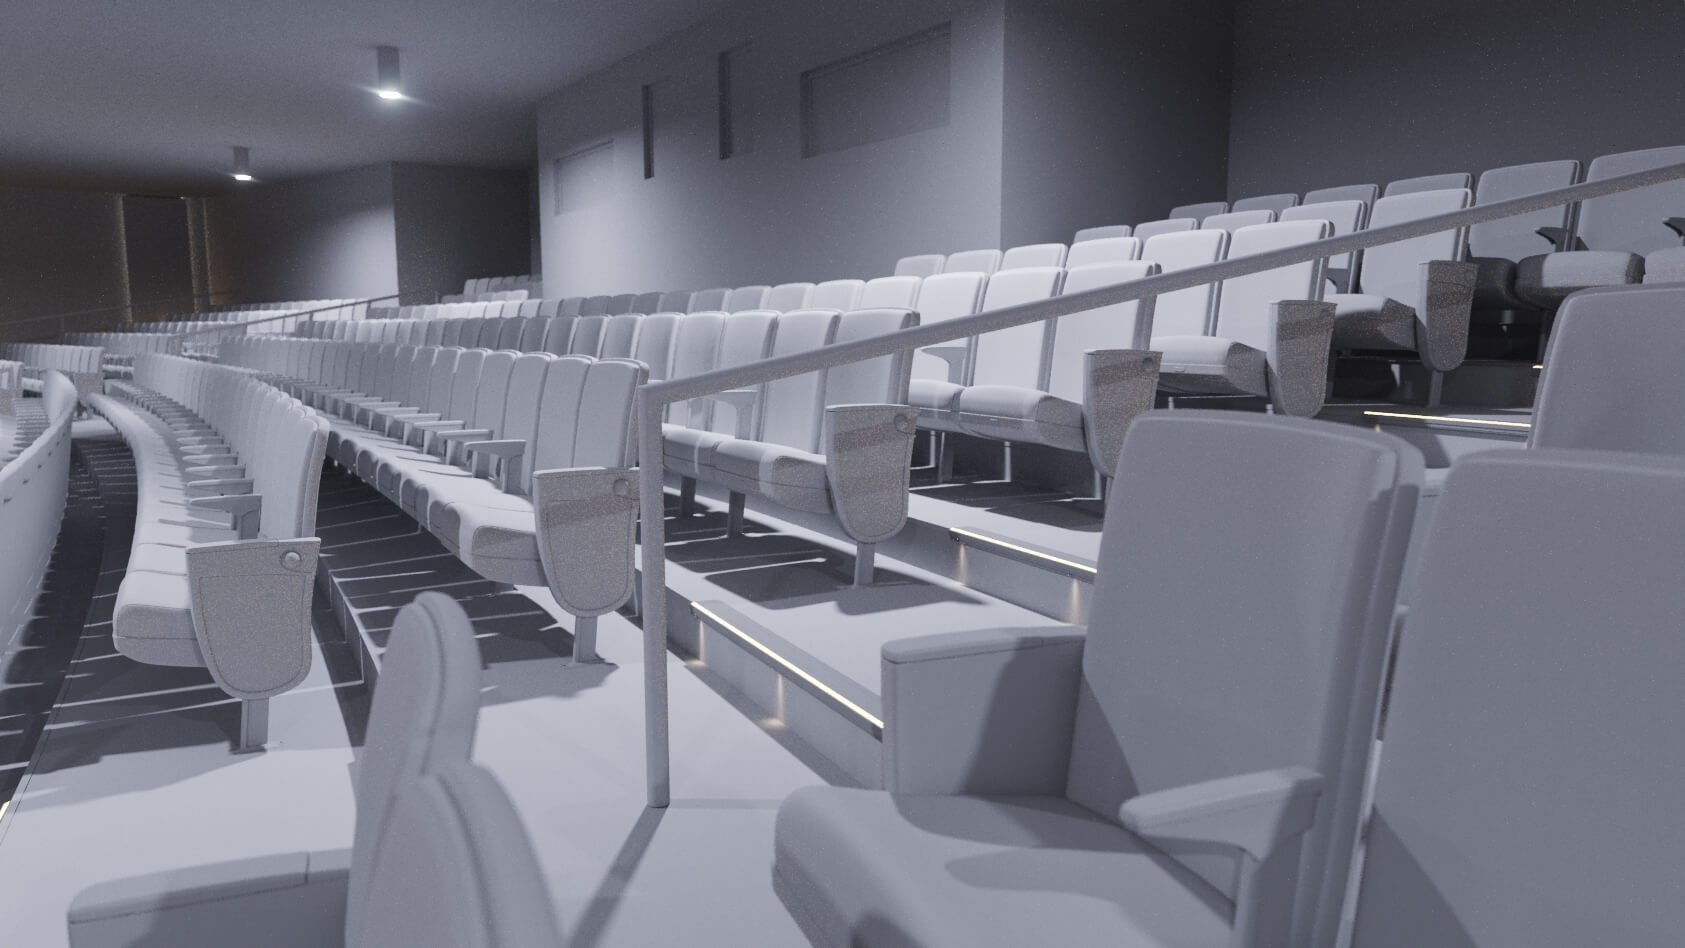 Stairs Lighting in the Theater 3D Animation